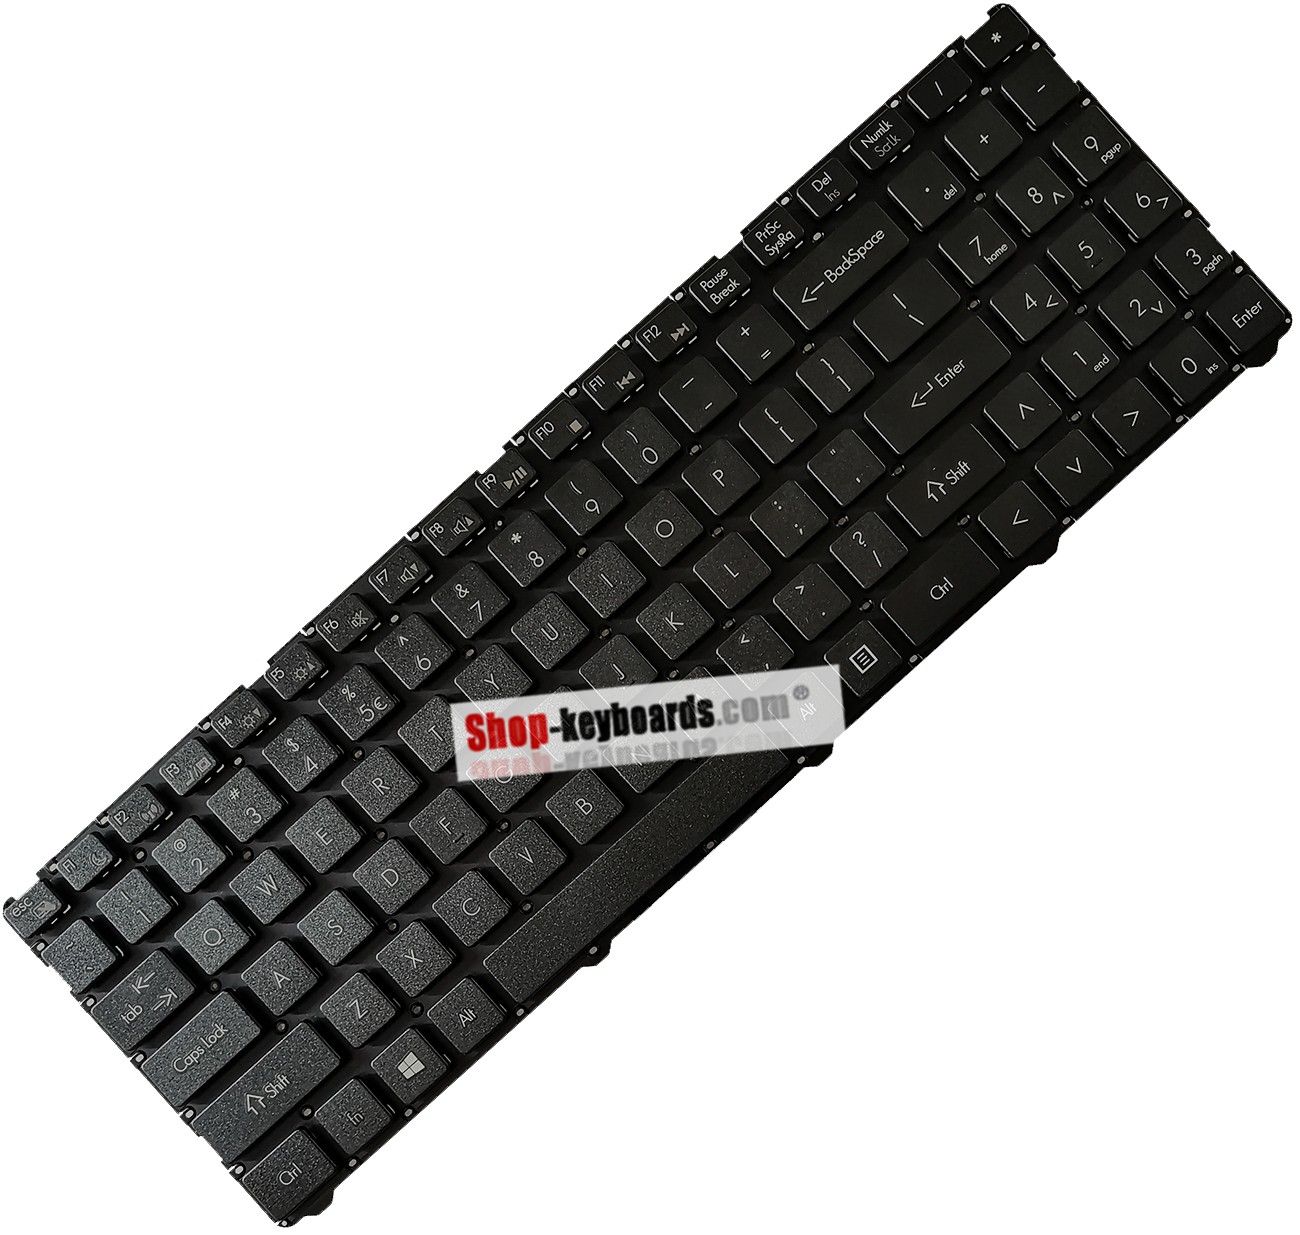 LG MP-12K73A0-9208 Keyboard replacement